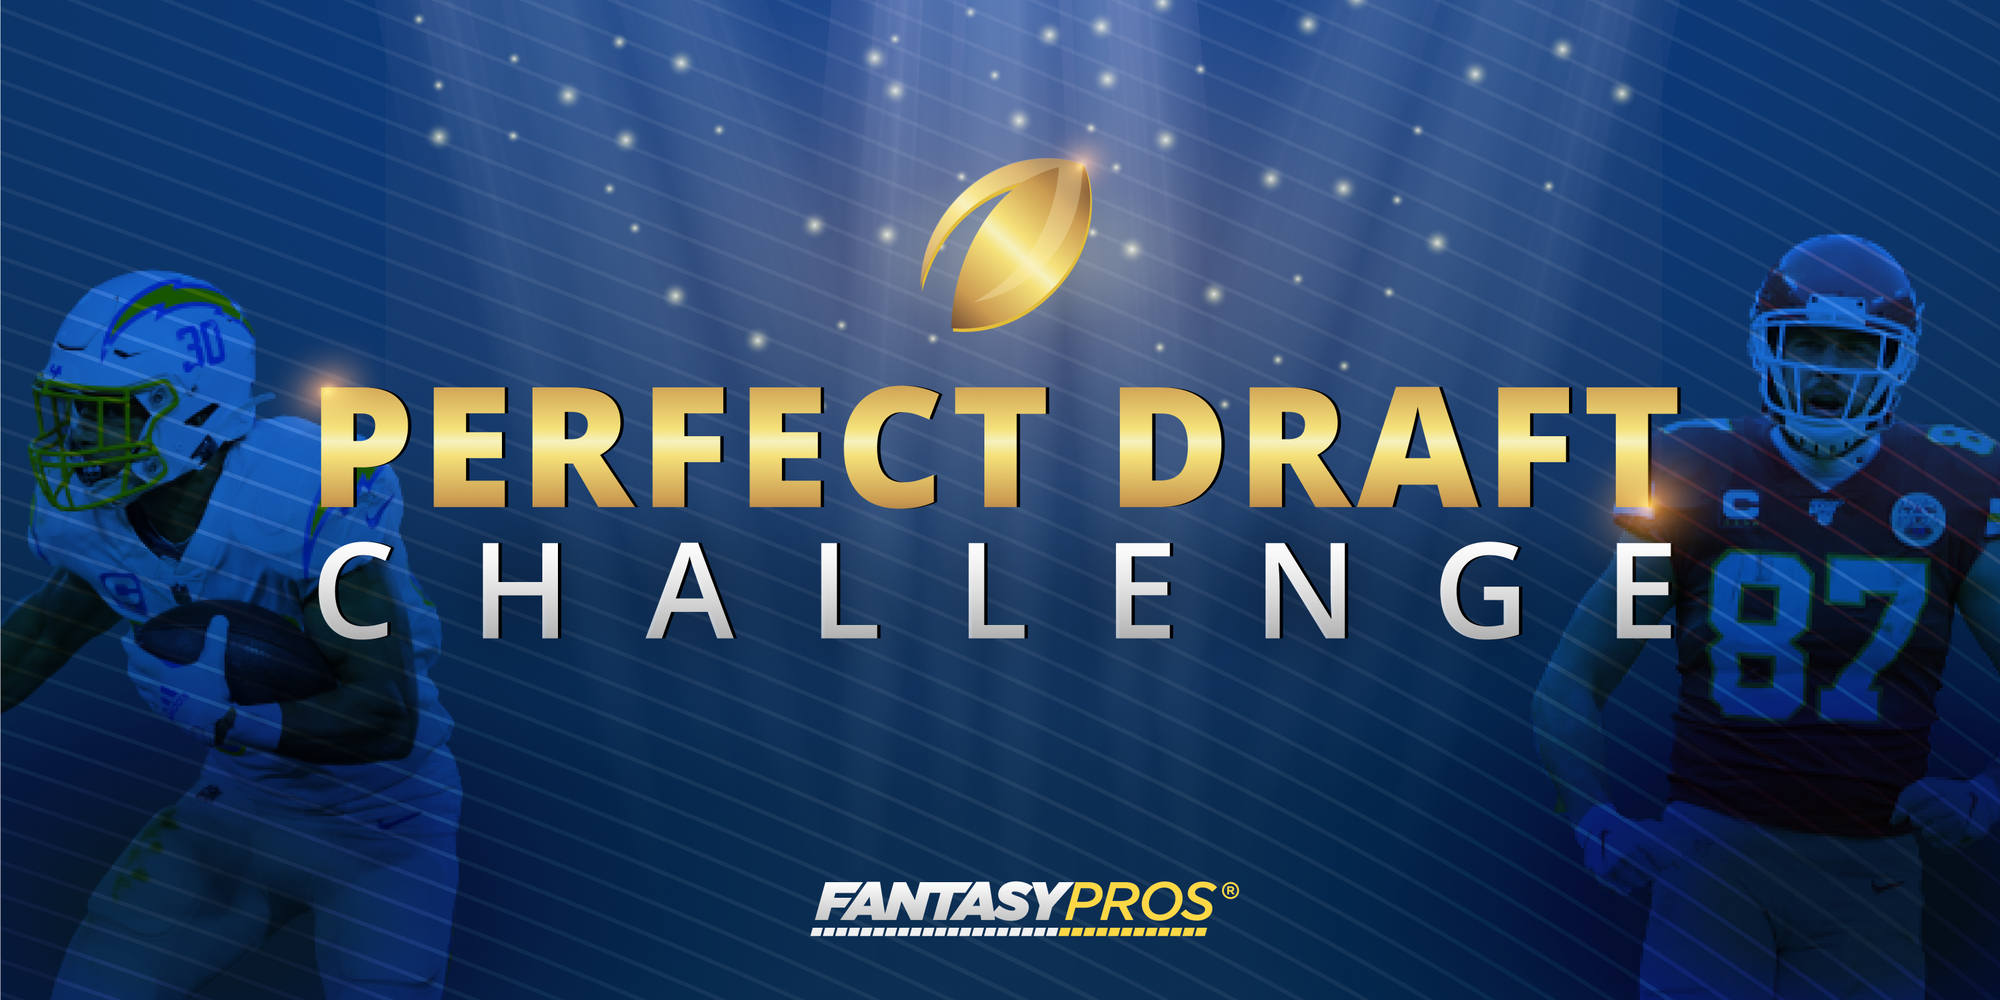 Master Your Fantasy Football Draft with These 5 BIG League Winning Tips 